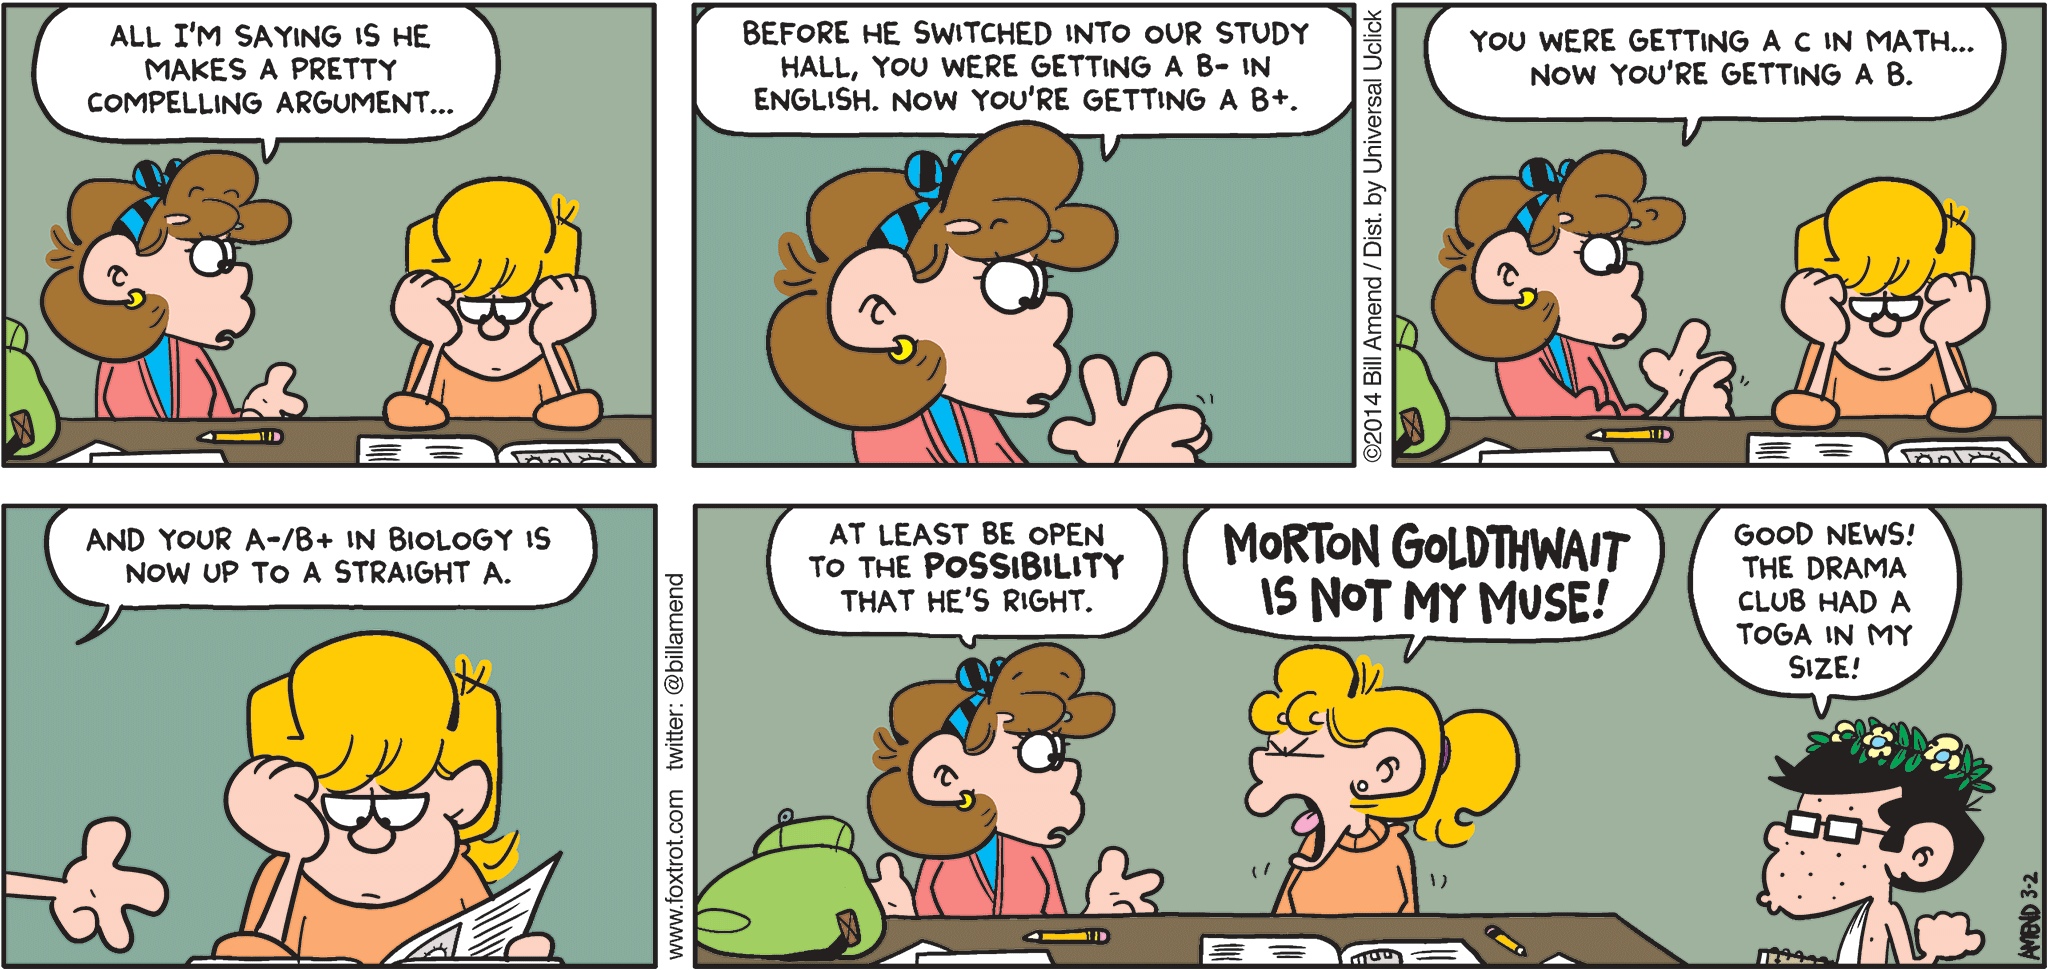 FoxTrot by Bill Amend - "Good Muse, Bad Muse" published March 2, 2014 - Girl: All I'm saying is he makes a pretty compelling argument...Before he switched into our study hall, you were getting a B- in English. Now you're getting a B+. You were getting a C in math...now you're getting a B. And your A-/B- in biology is now up to a straight A. at least be open to the POSSIBILITY that he might be right. Paige: MORTON GOLDTHWAIT IS NOT MY MUSE! Morton: Good news! The drama club had a toga in my size!